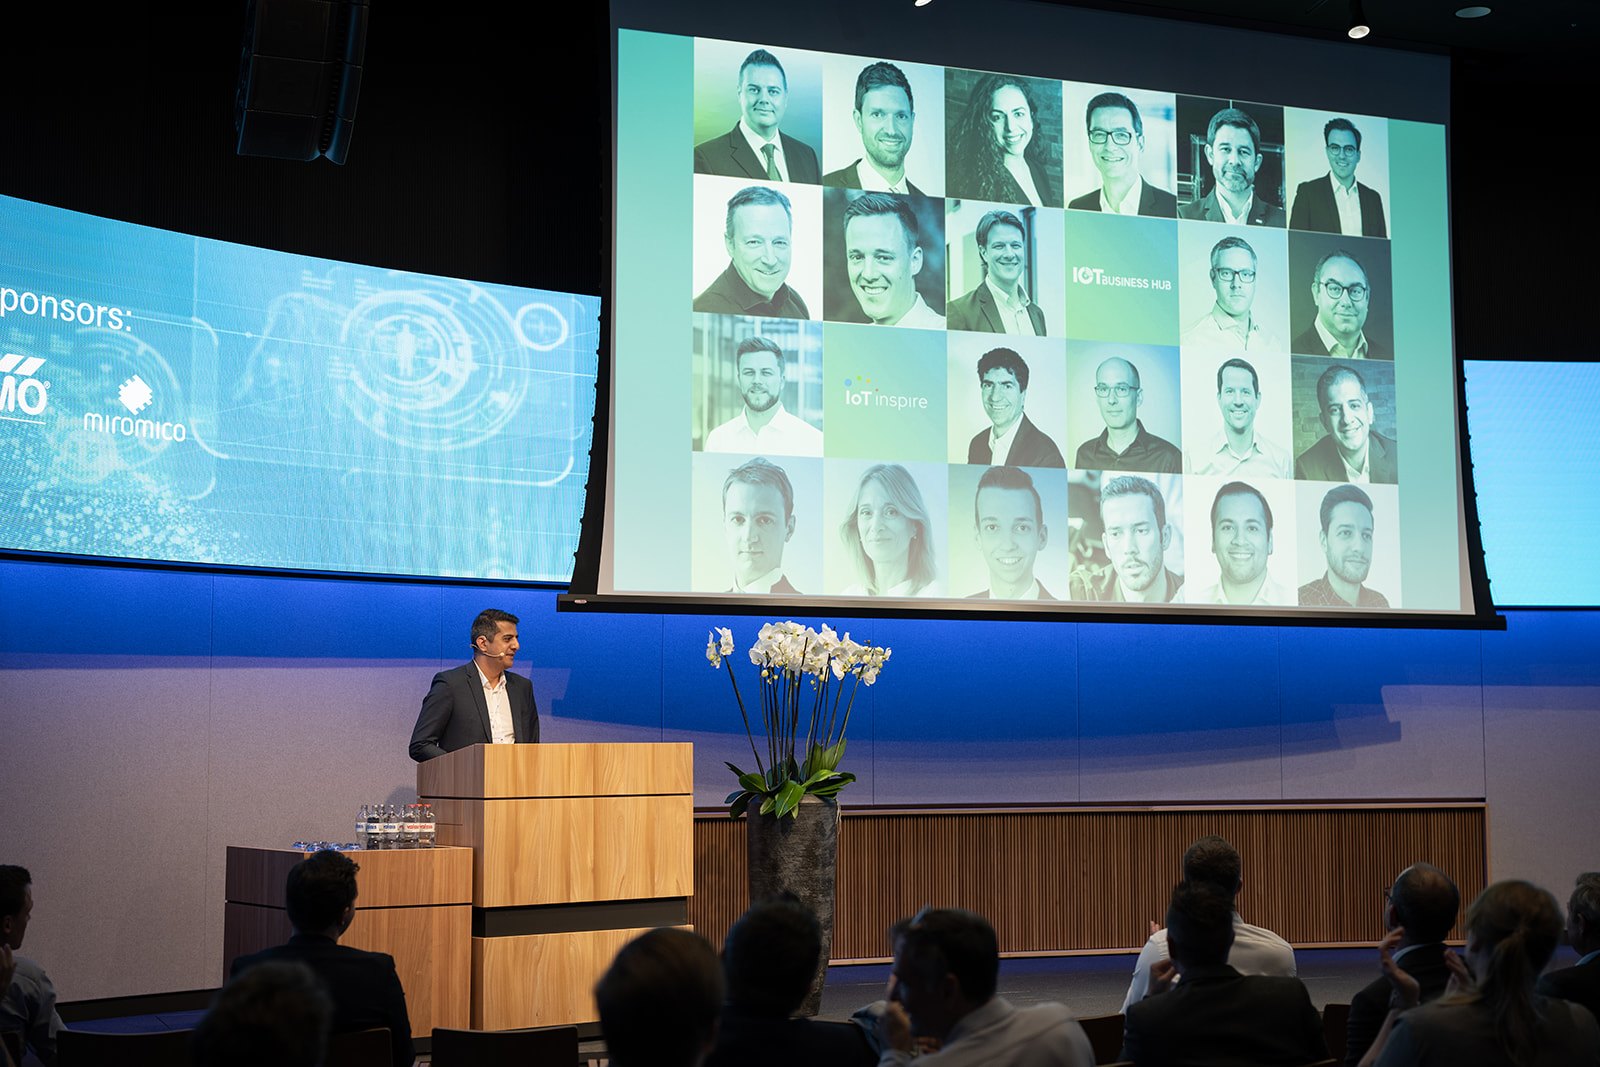 Highlights from IoT Inspire Zurich 2022 organised by IoT Business Hub